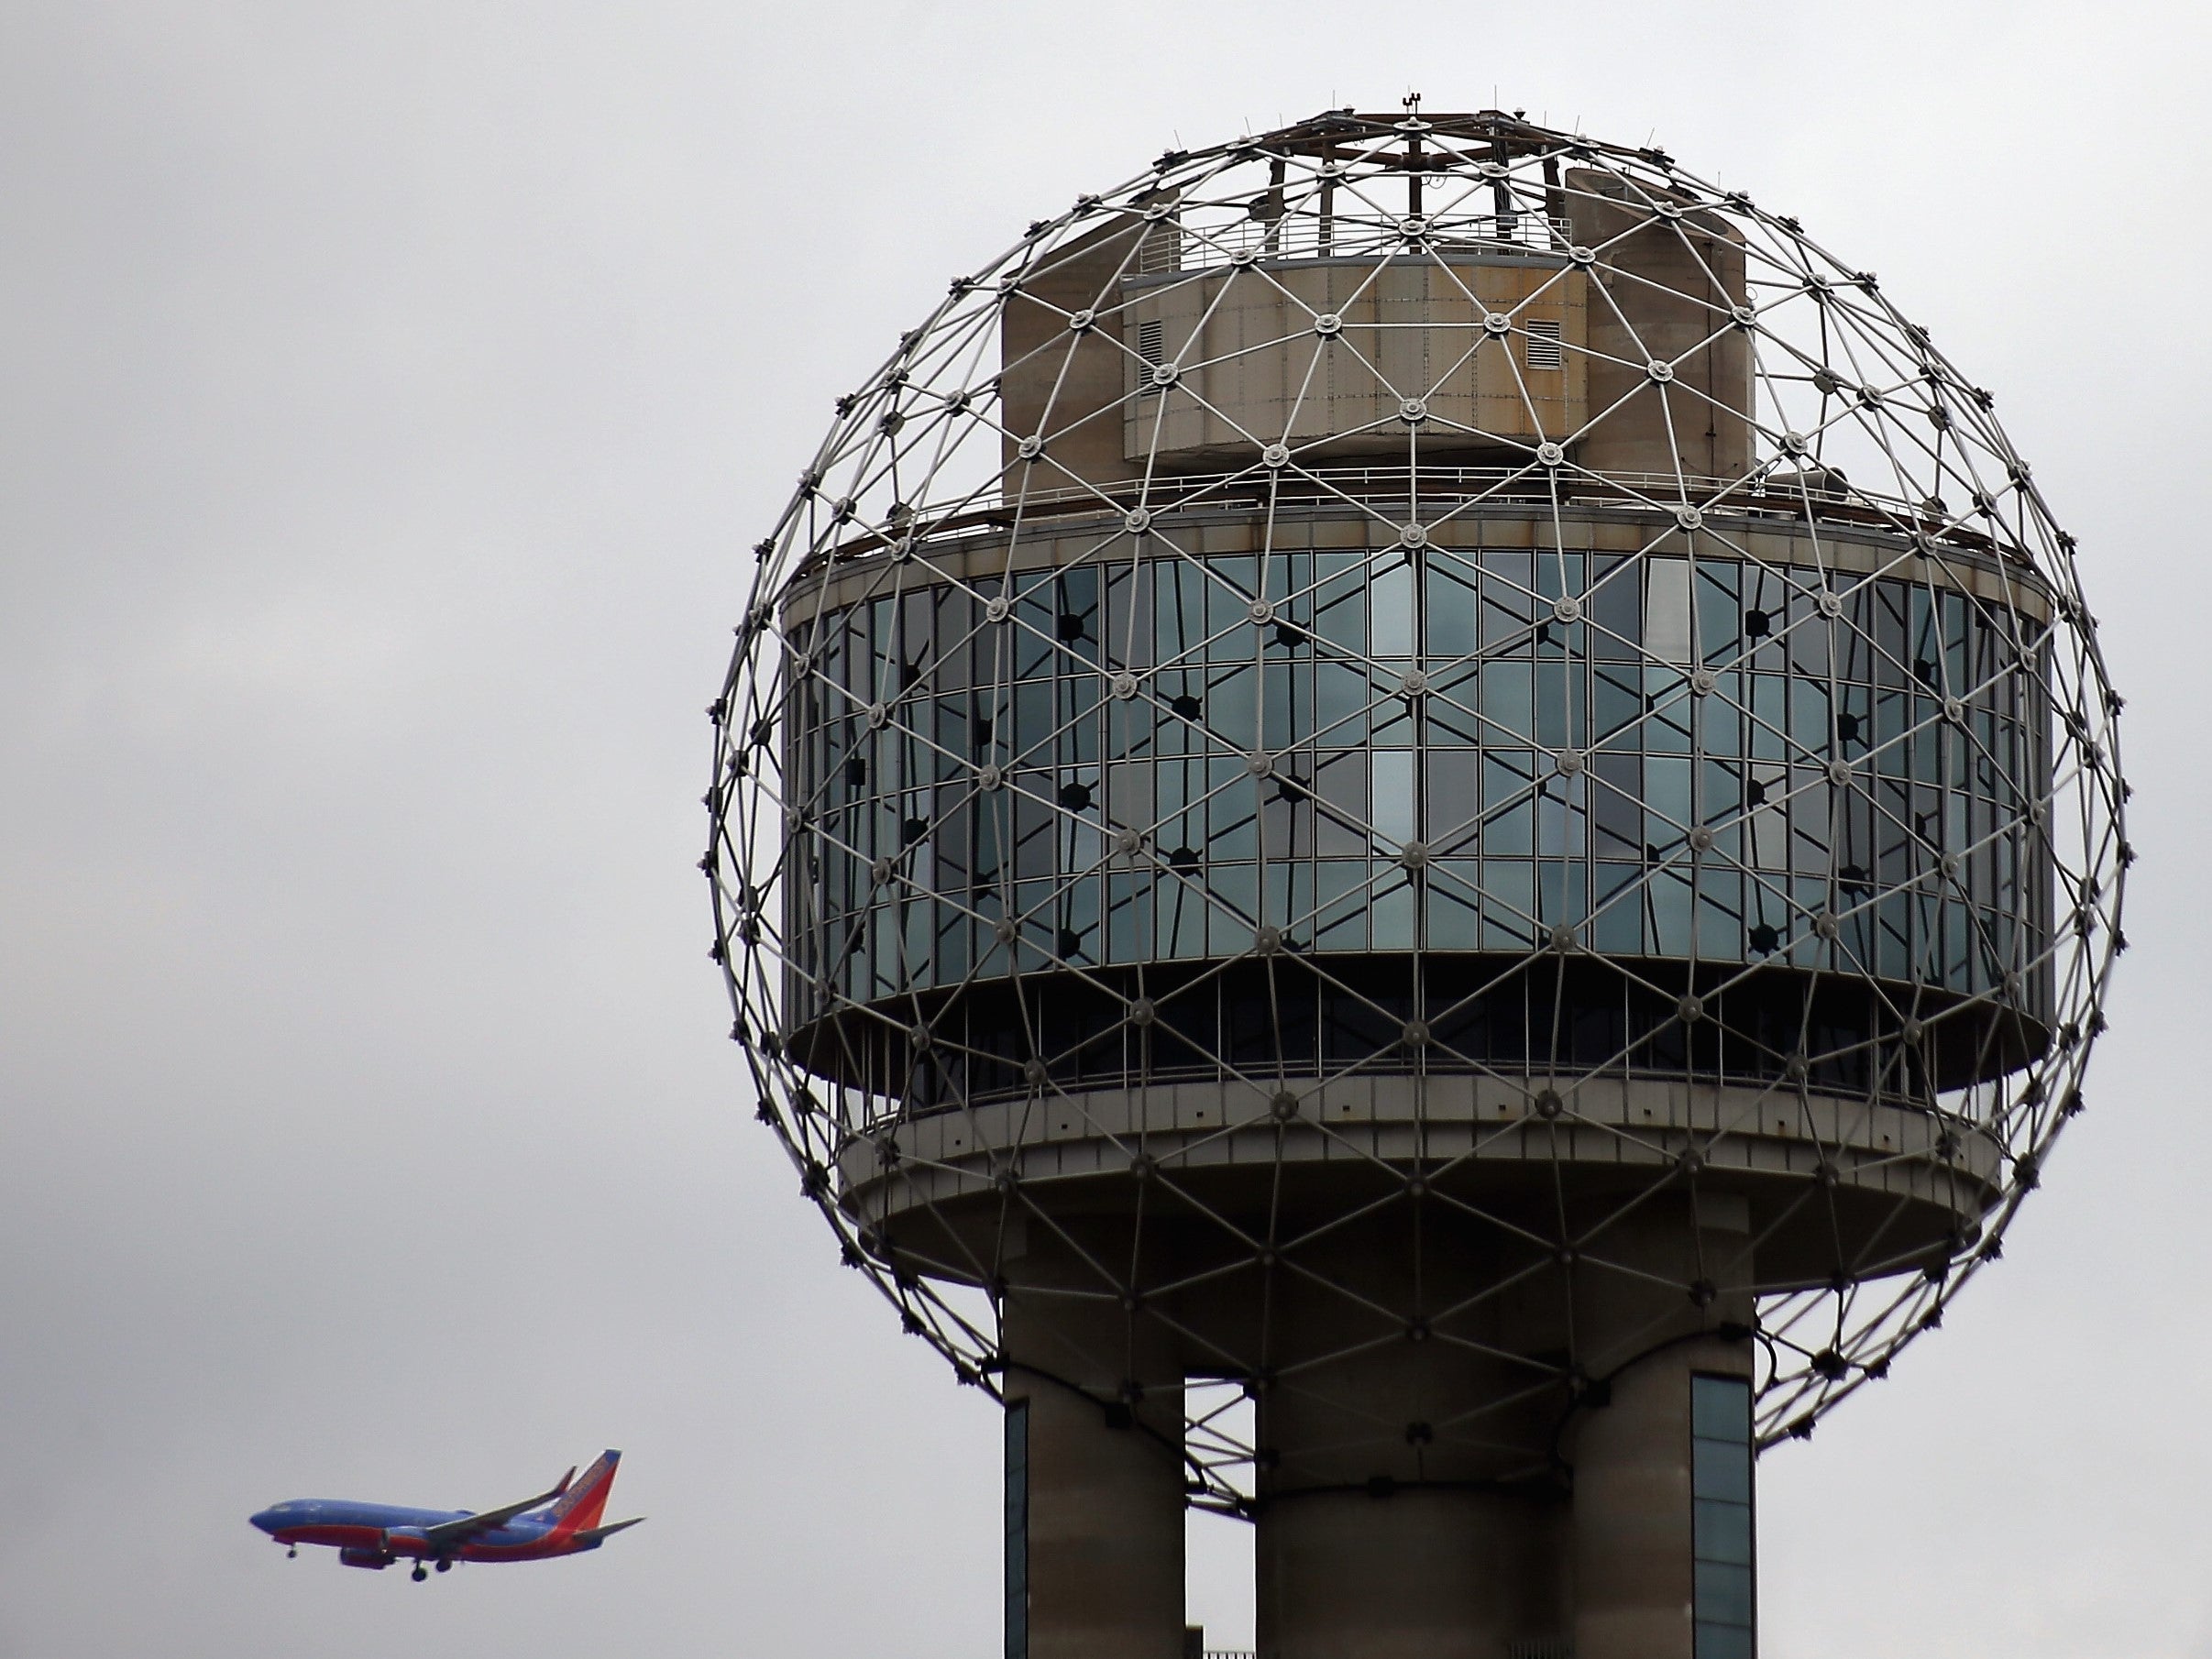 A Southwest Airline plane flies past Reunion Tower on 4 April, 2013 in Dallas, Texas